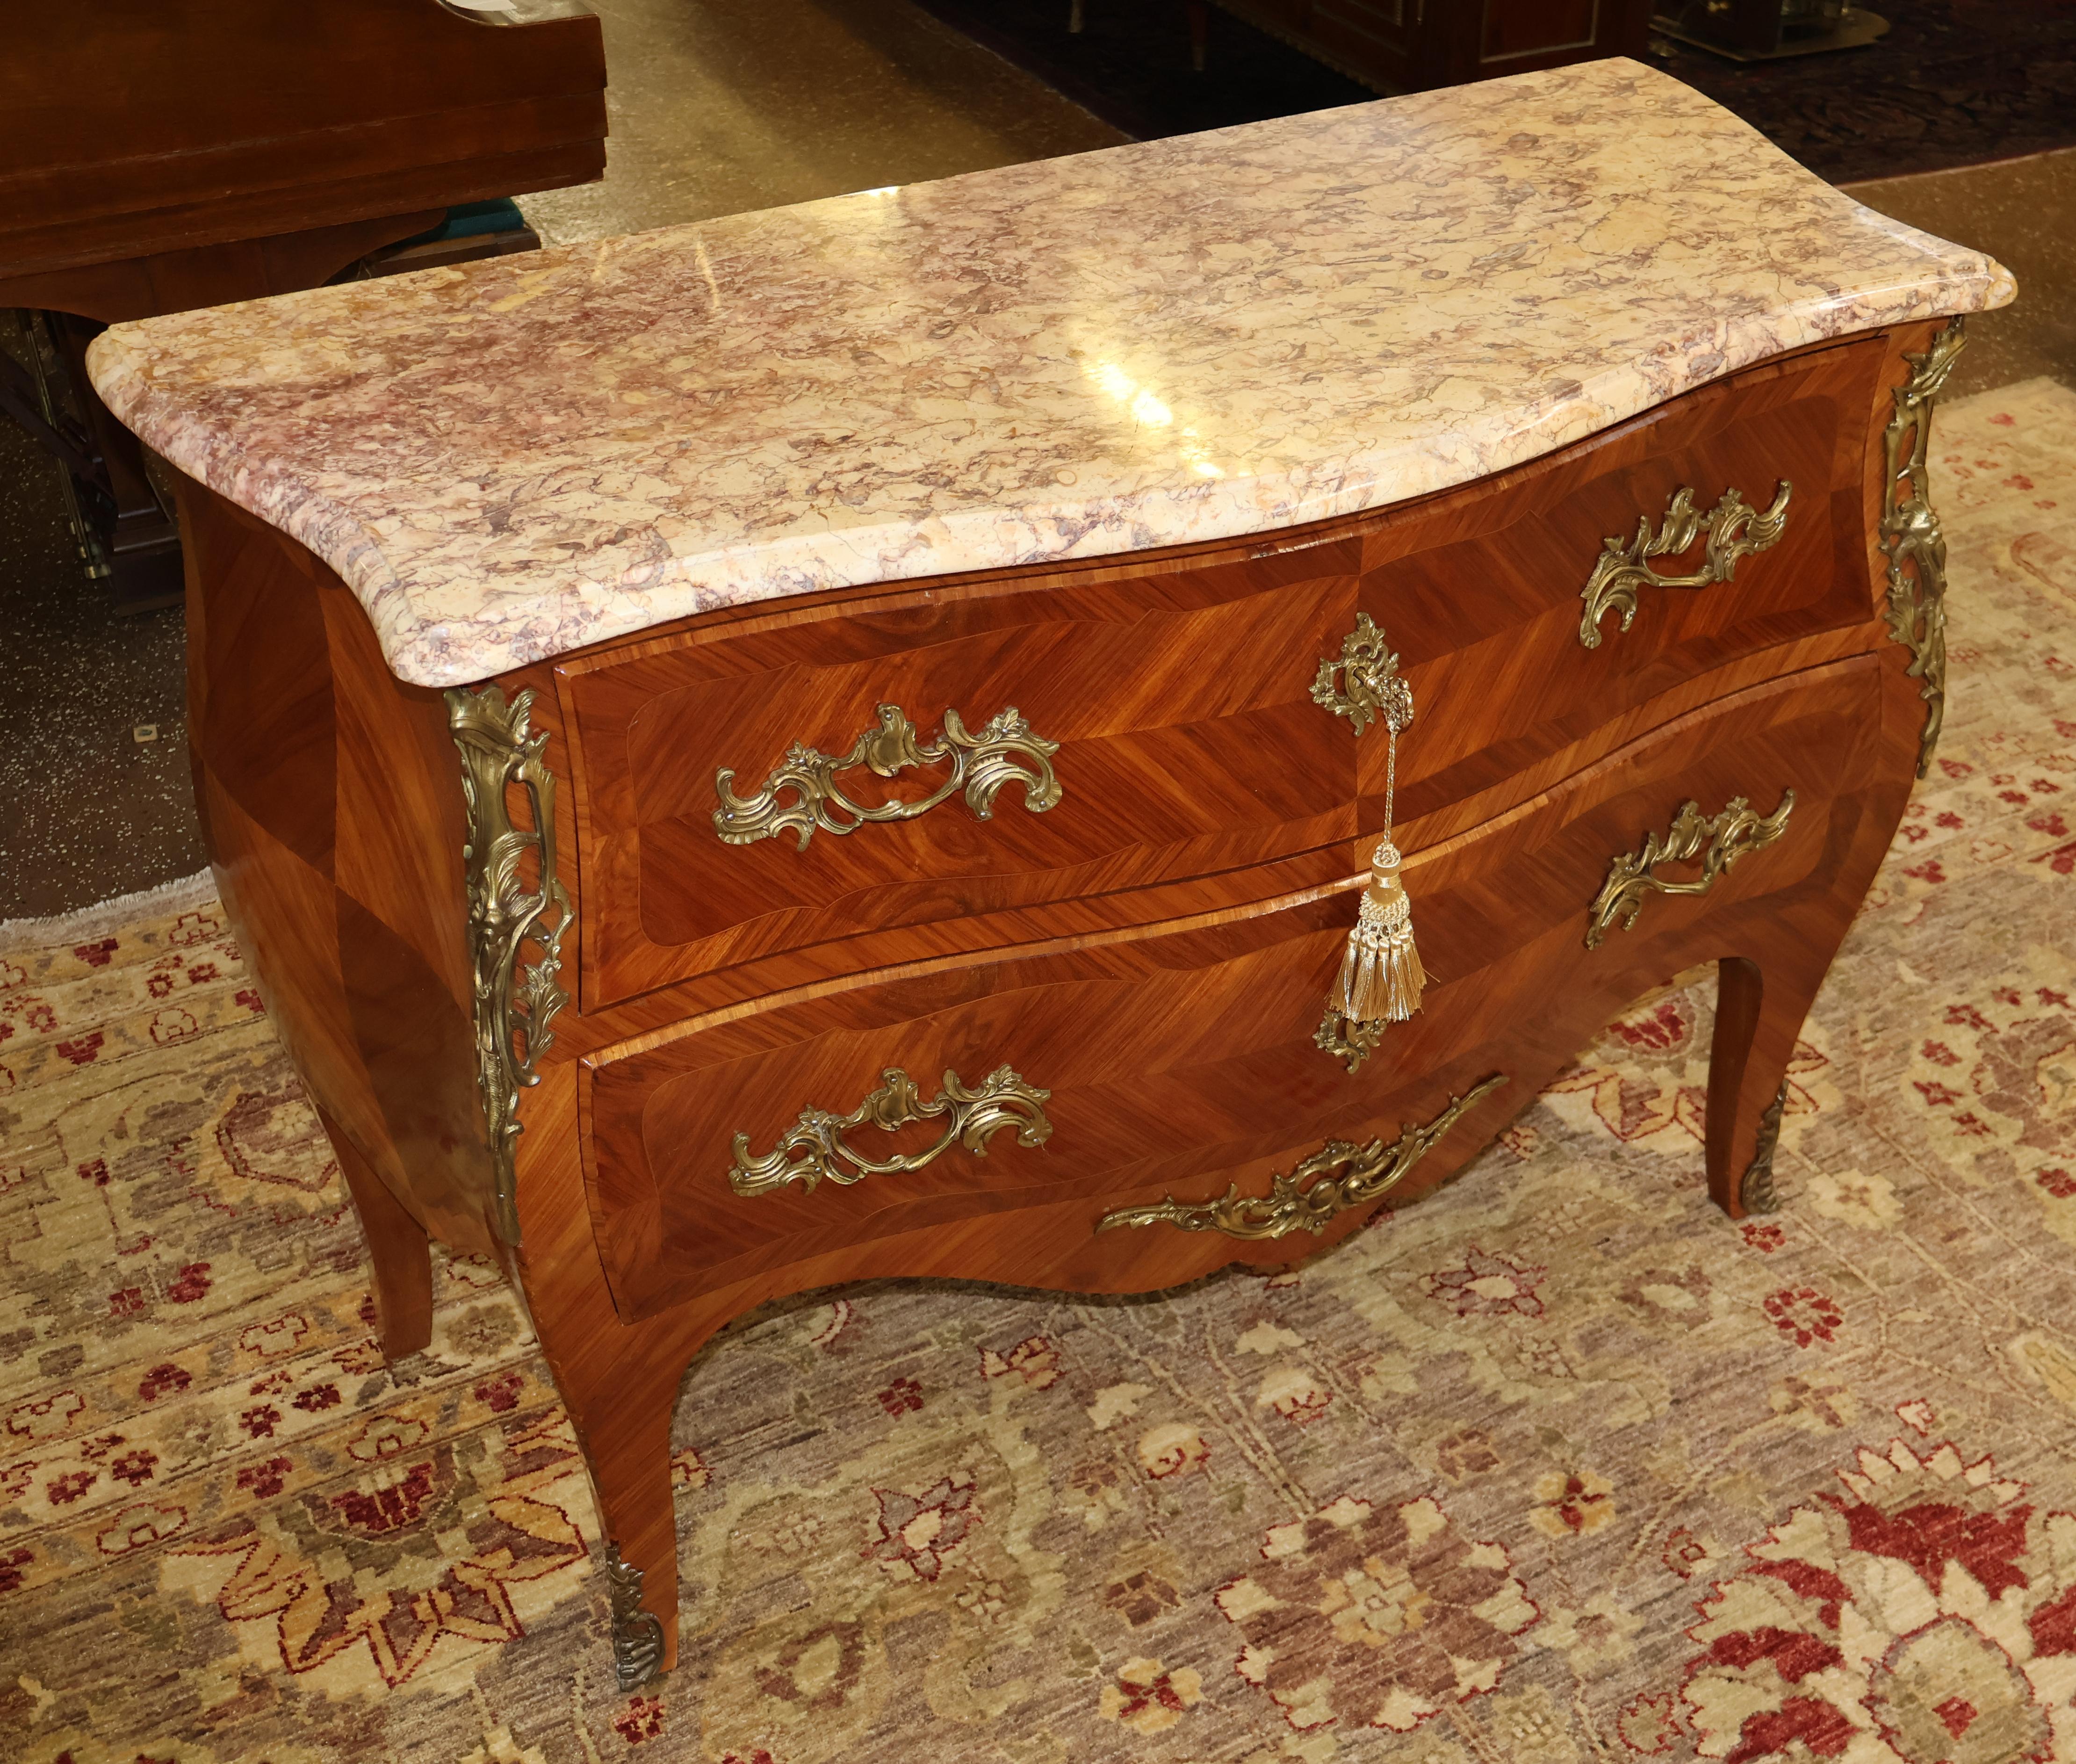 Early 20th Century French Louis XV Style Kingwood Marble Top Commode Dresser Chest of Drawers For Sale